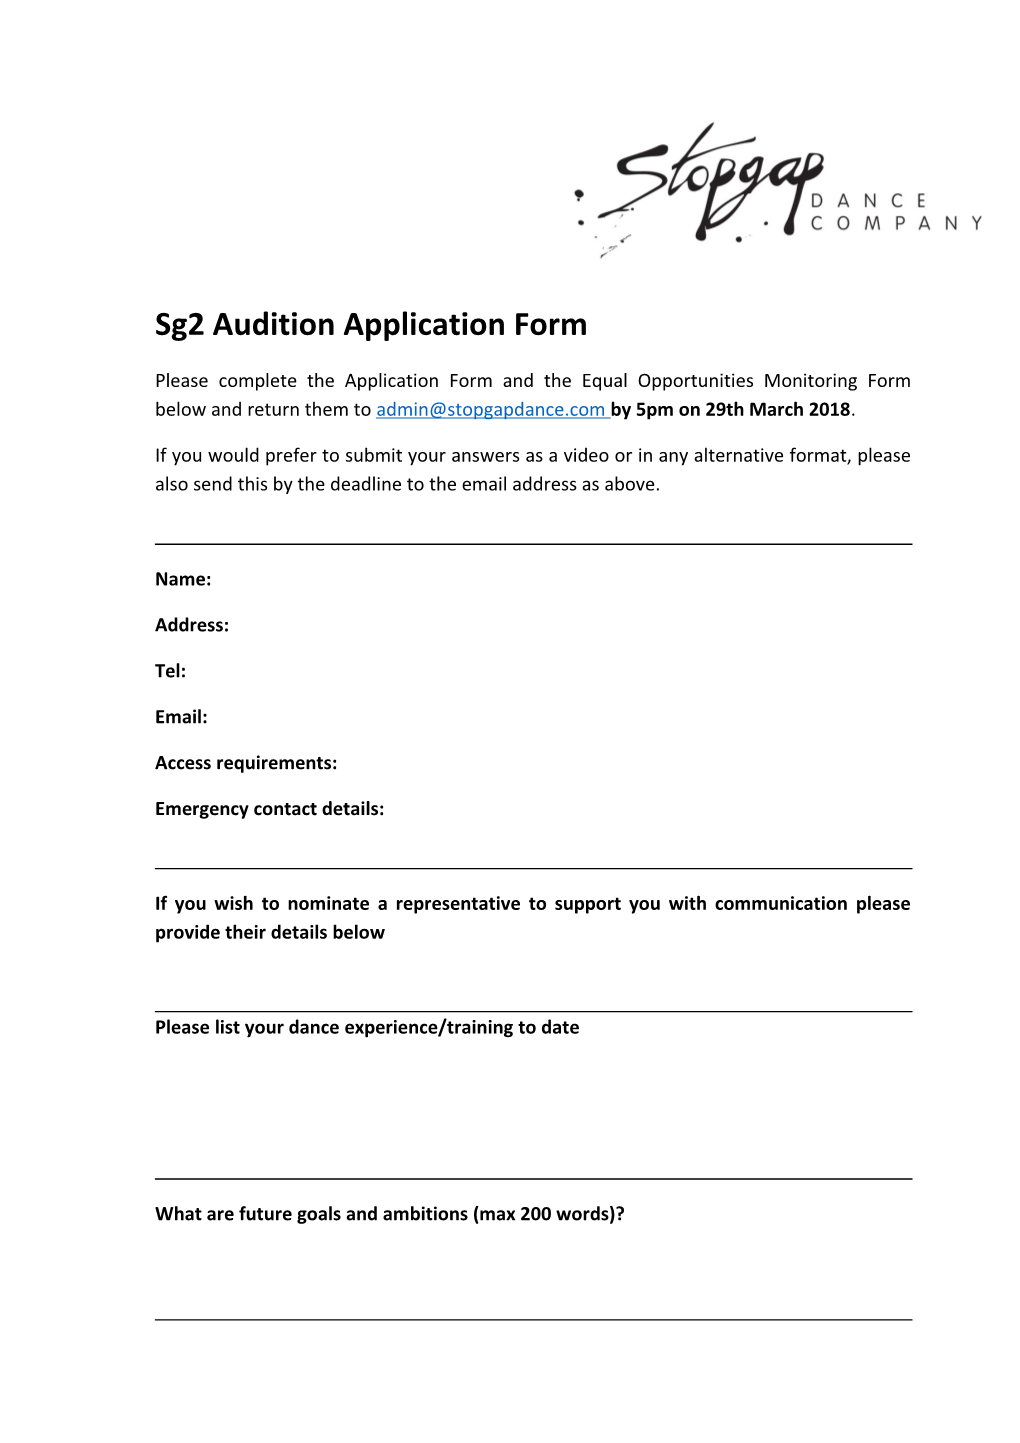 Sg2 Audition Application Form